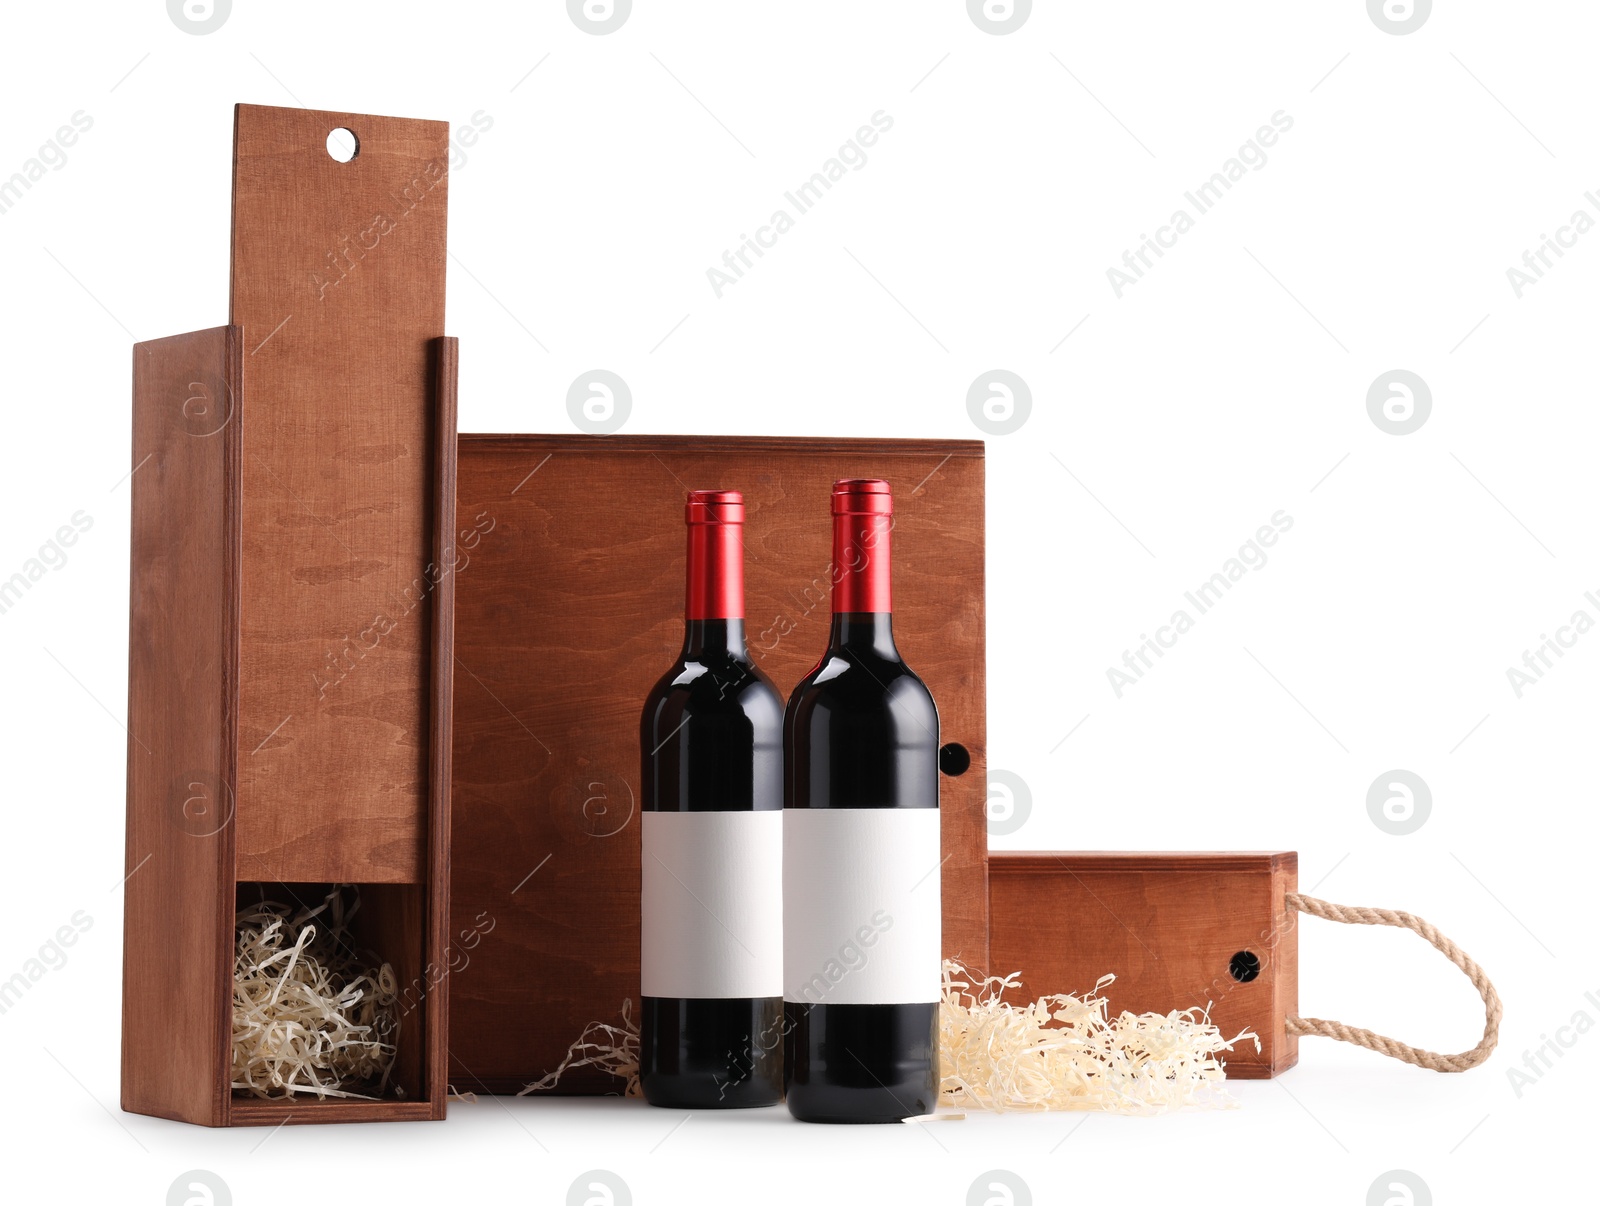 Photo of Wooden gift boxes with wine bottles isolated on white